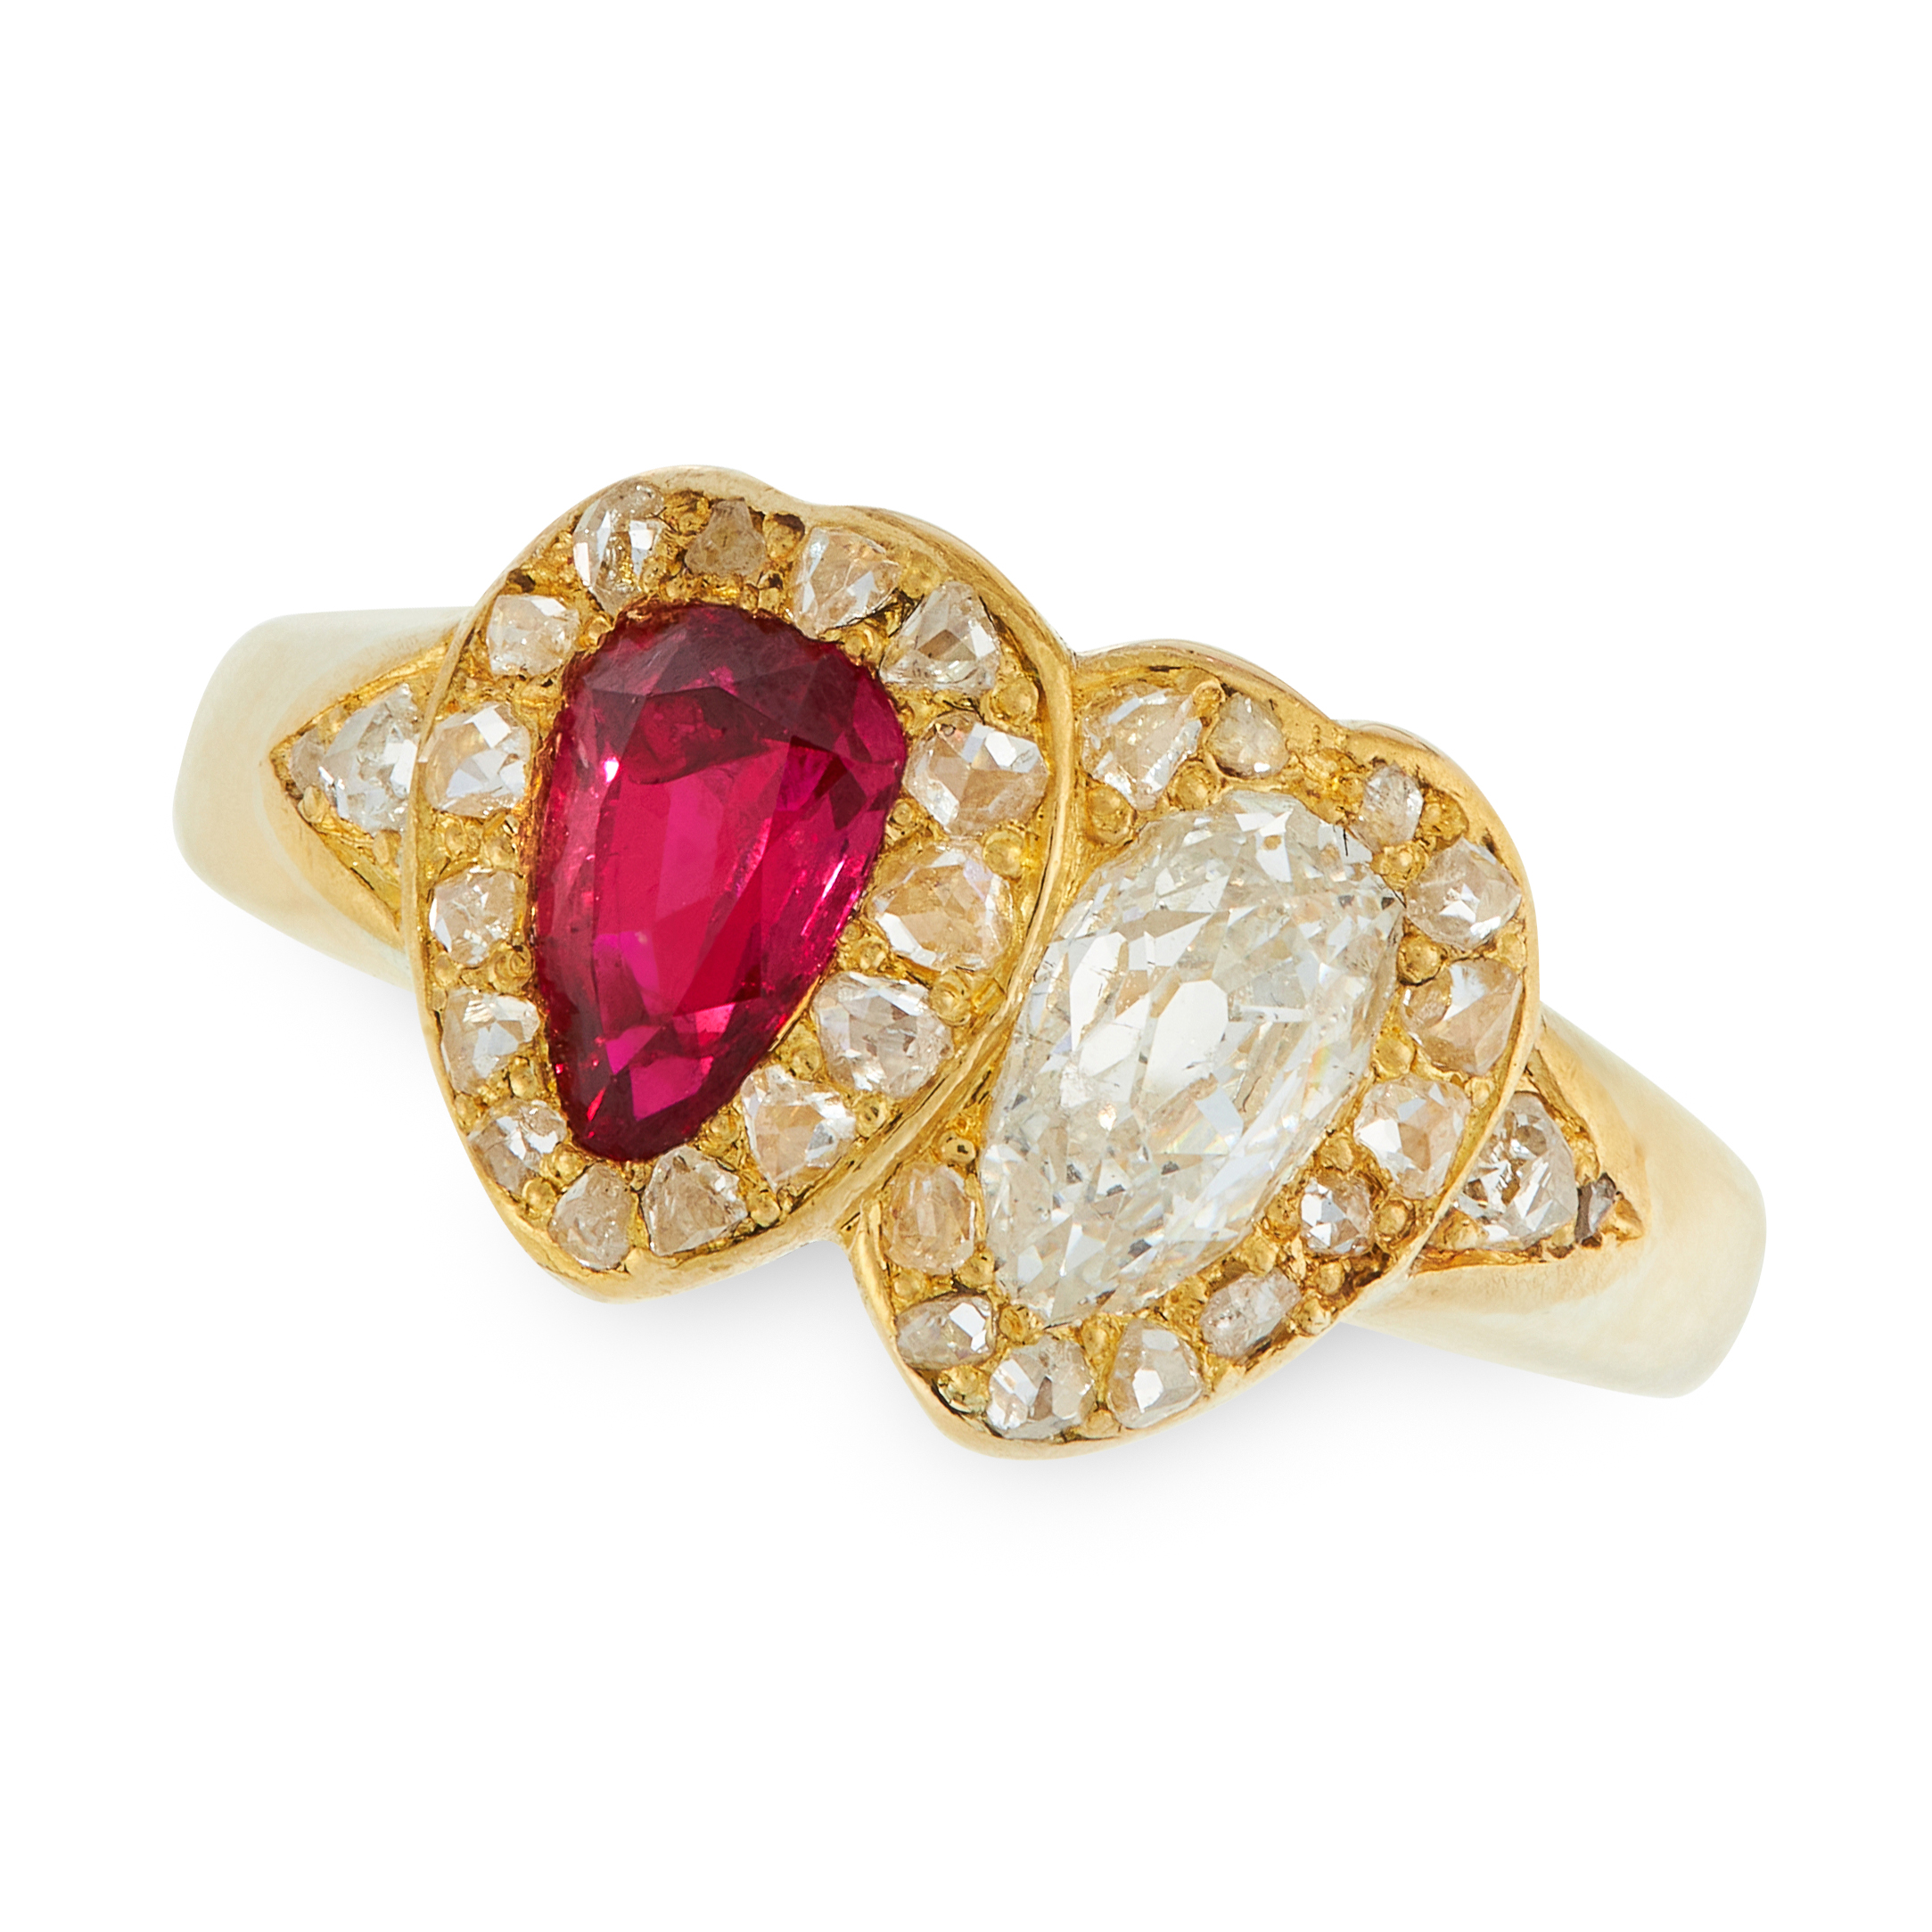 A RUBY AND DIAMOND SWEETHEART RING in 18ct yellow gold, designed as two interlocking hearts, each